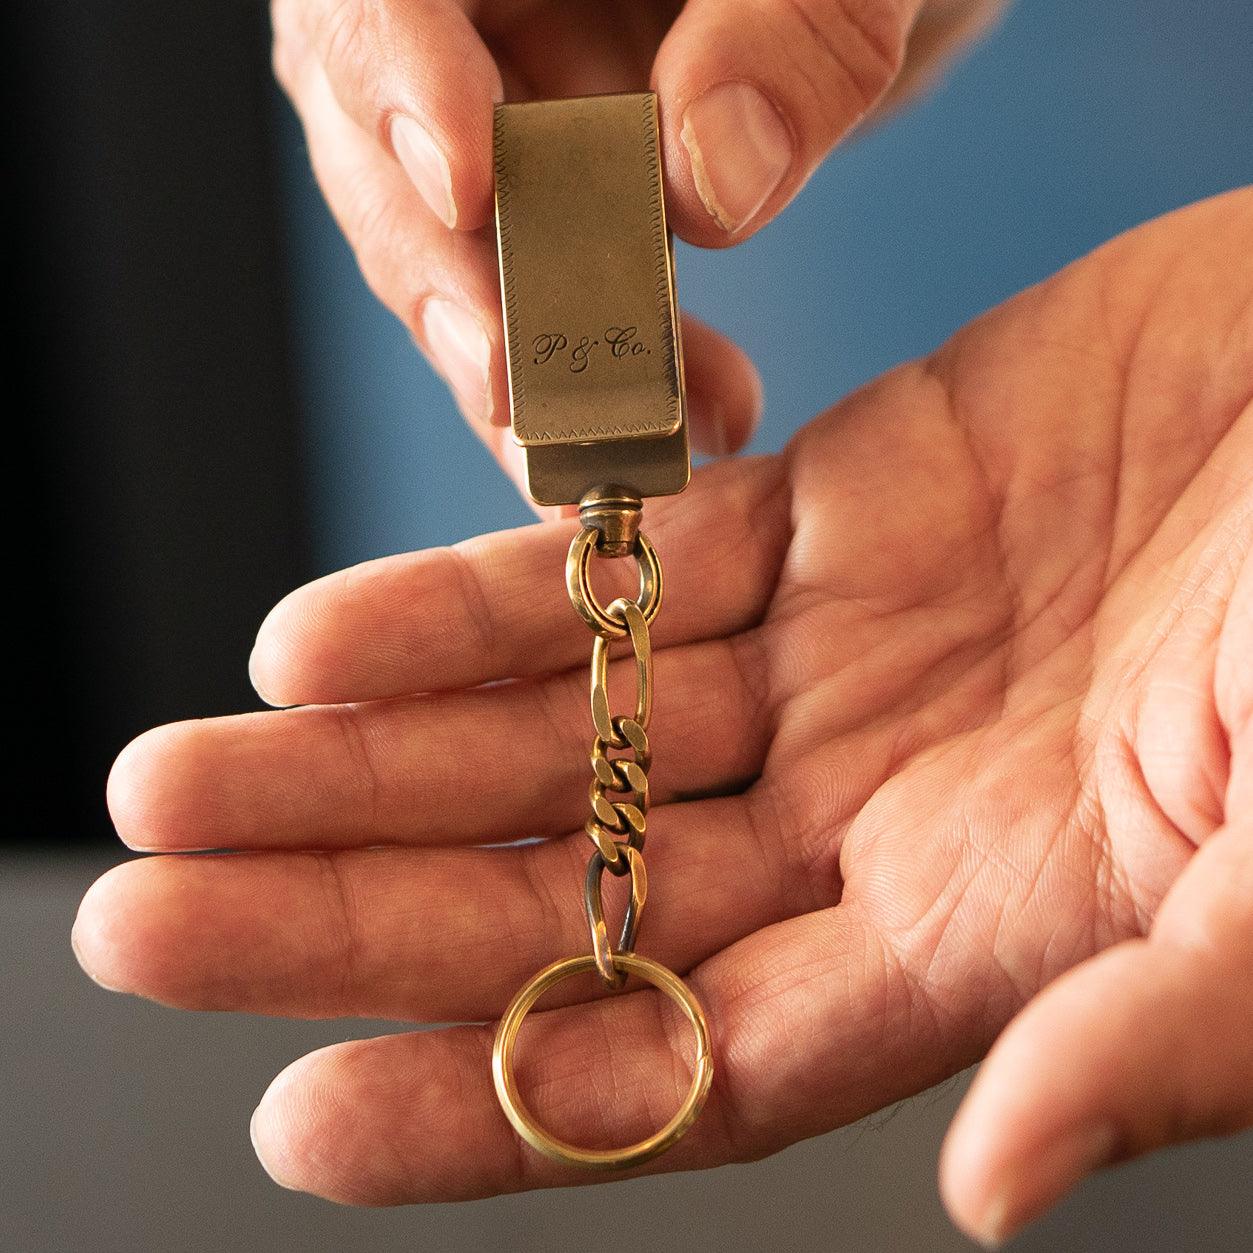 Image showing the Peanuts & Co SNAKE CLIP TYPE KEYCHAIN - Brass which is a Others described by the following info Accessories, Others, Peanuts & Co, Released and sold on the IRON HEART GERMANY online store